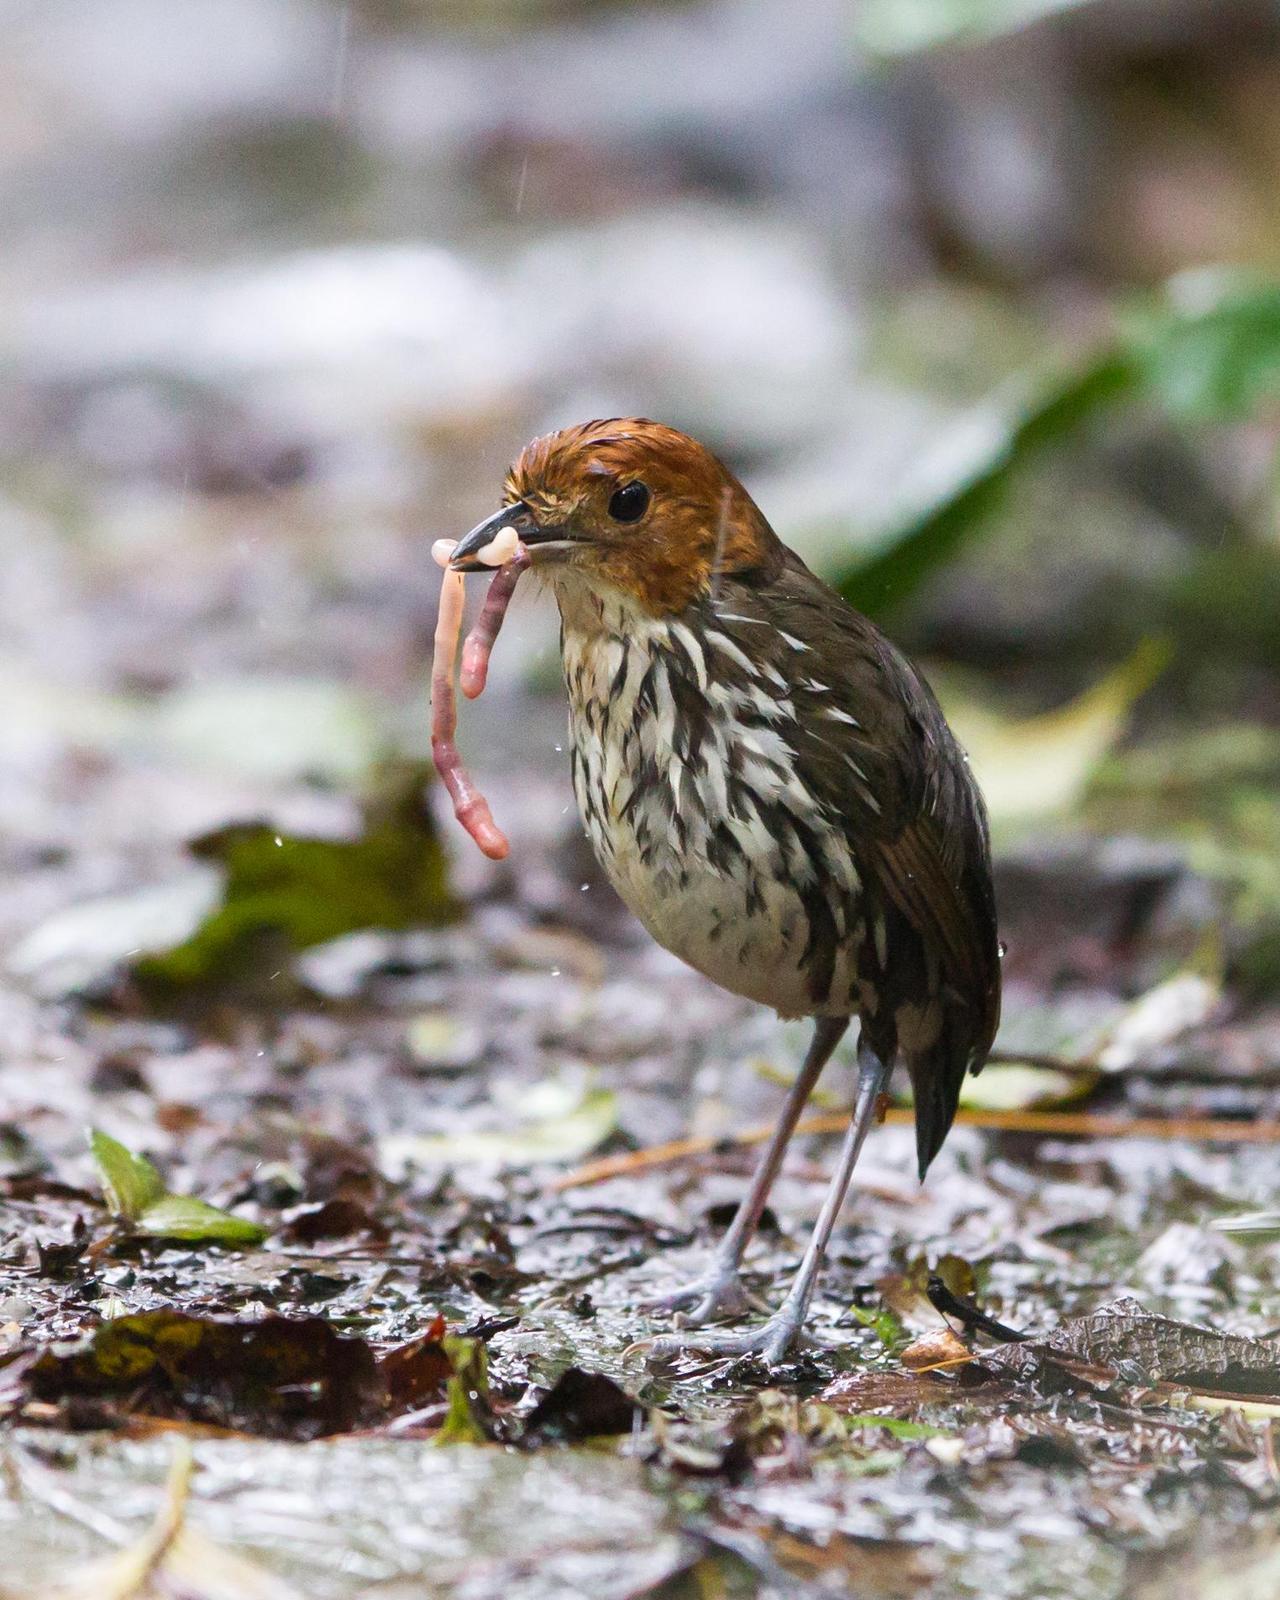 Chestnut-crowned Antpitta Photo by Kevin Berkoff